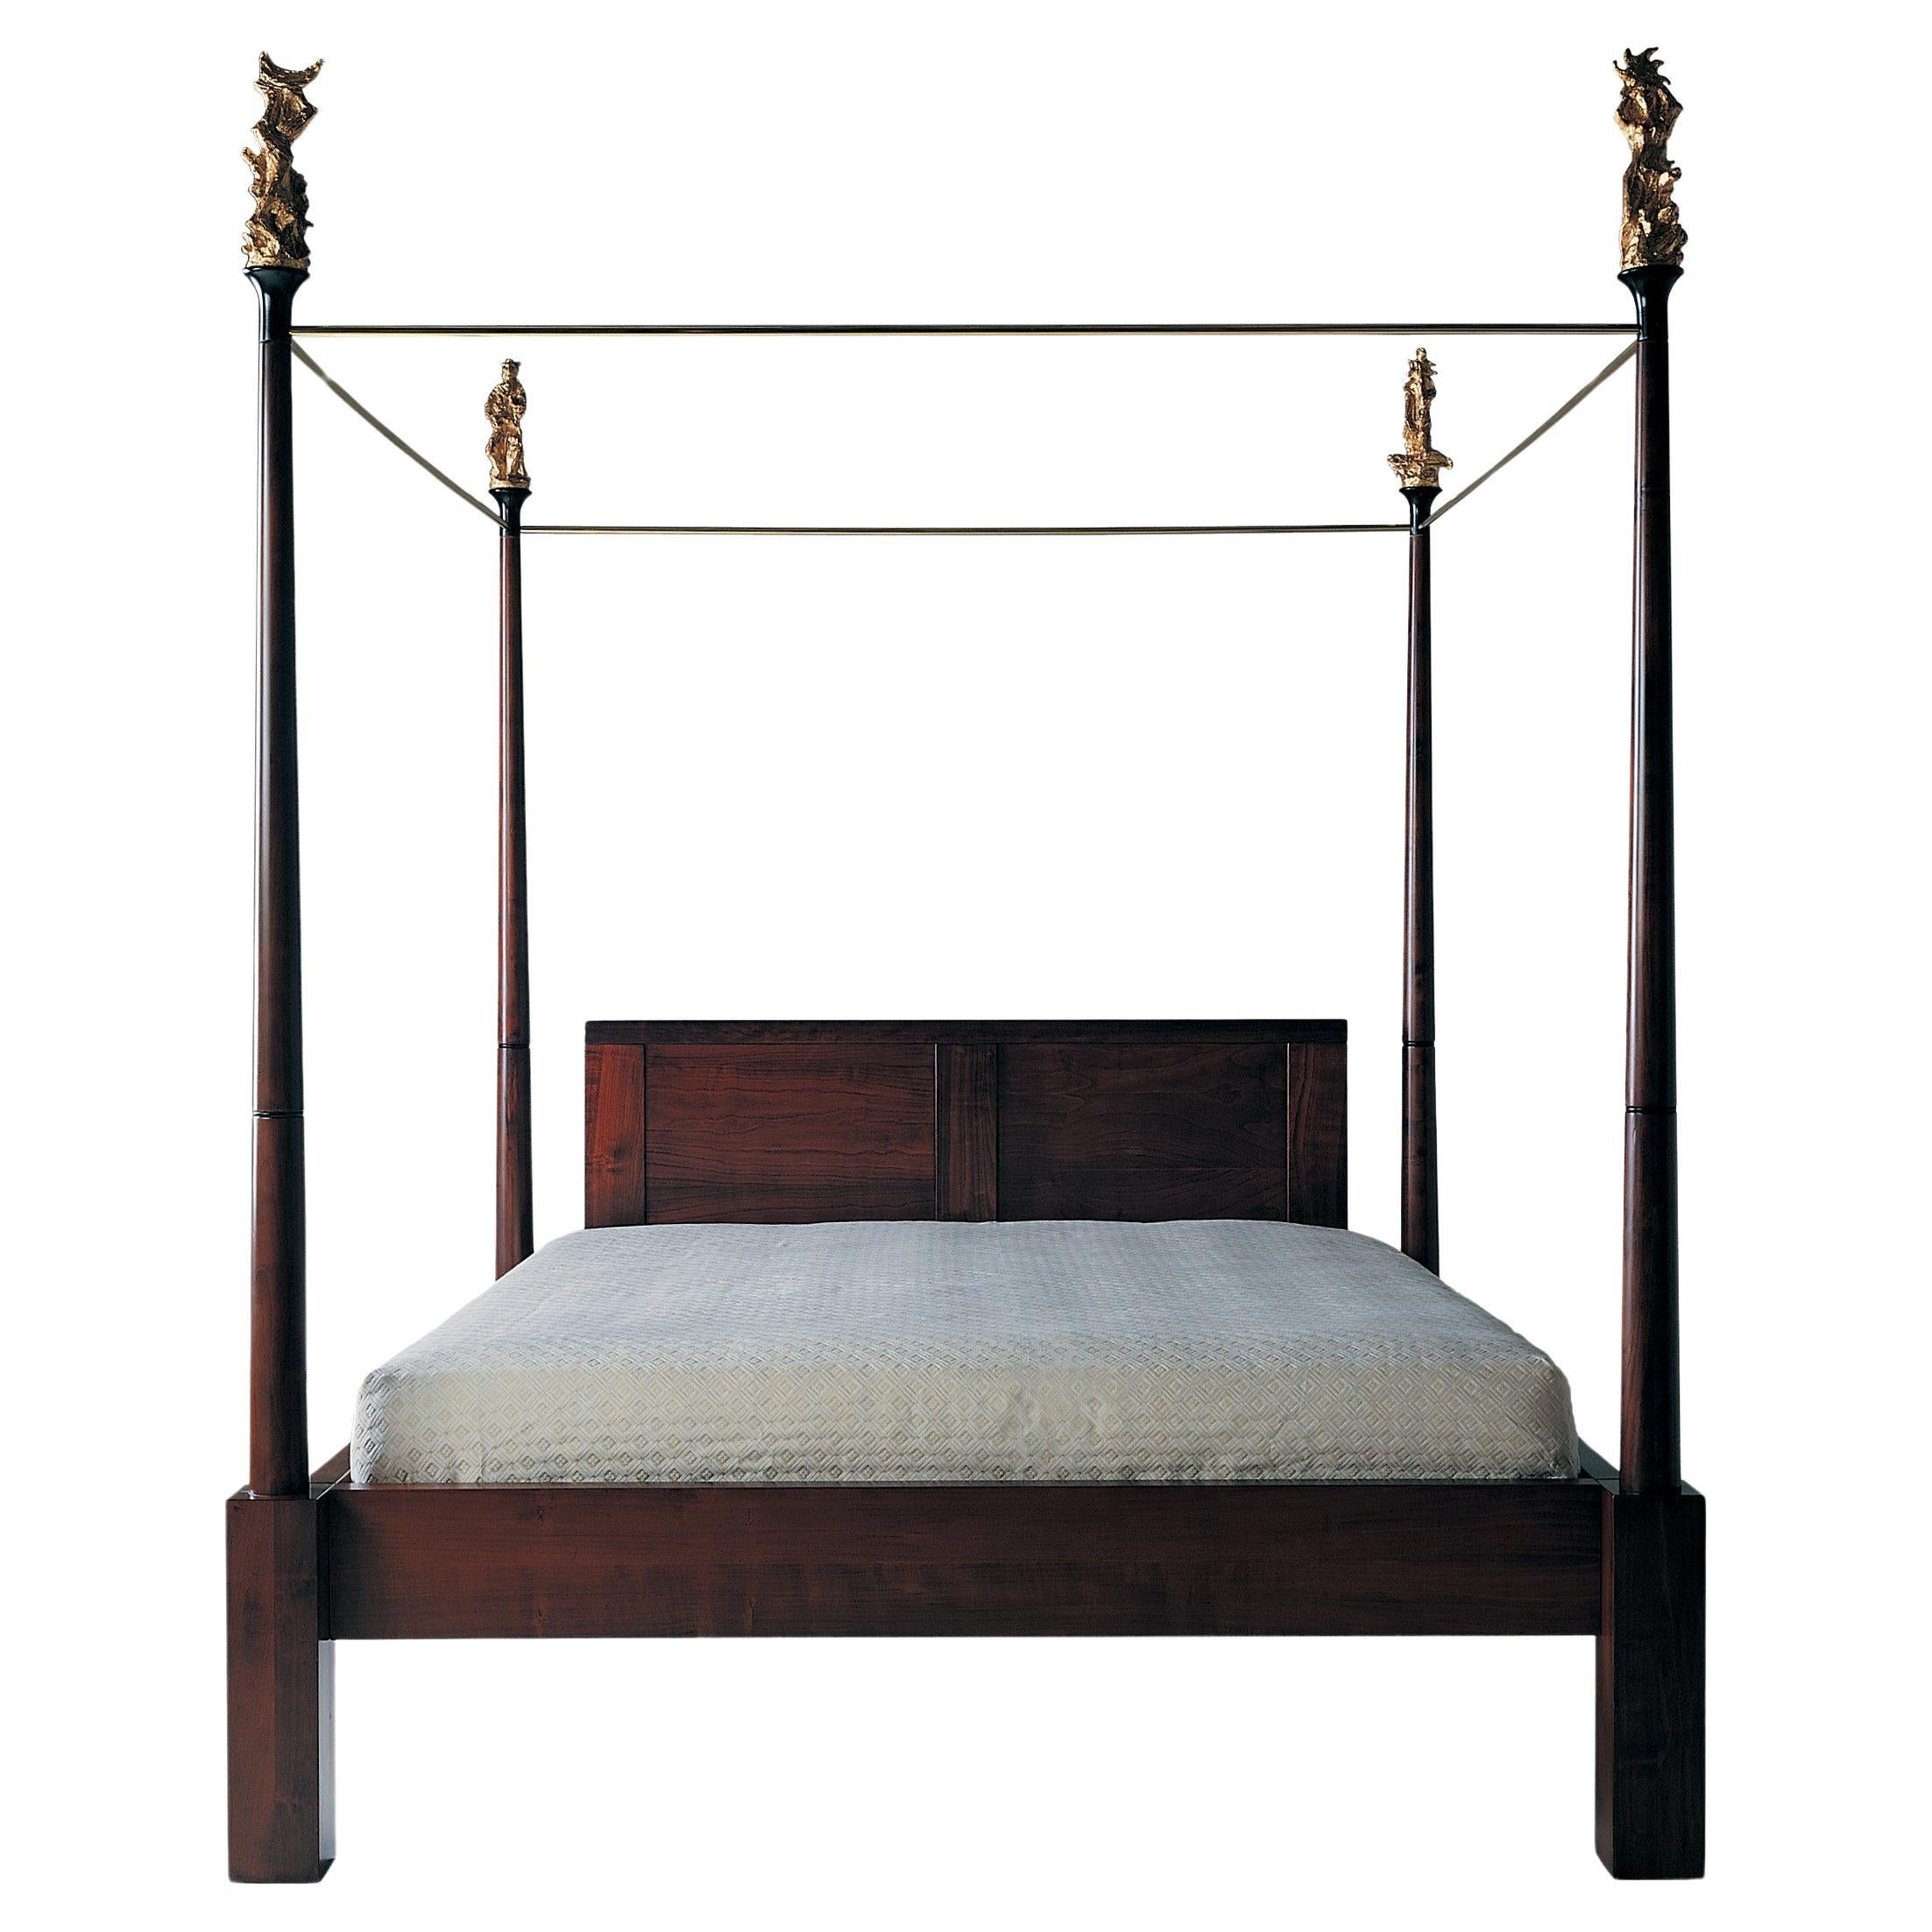 Contemporary Art Bed - Antiquam by Adolfo Natalini For Sale